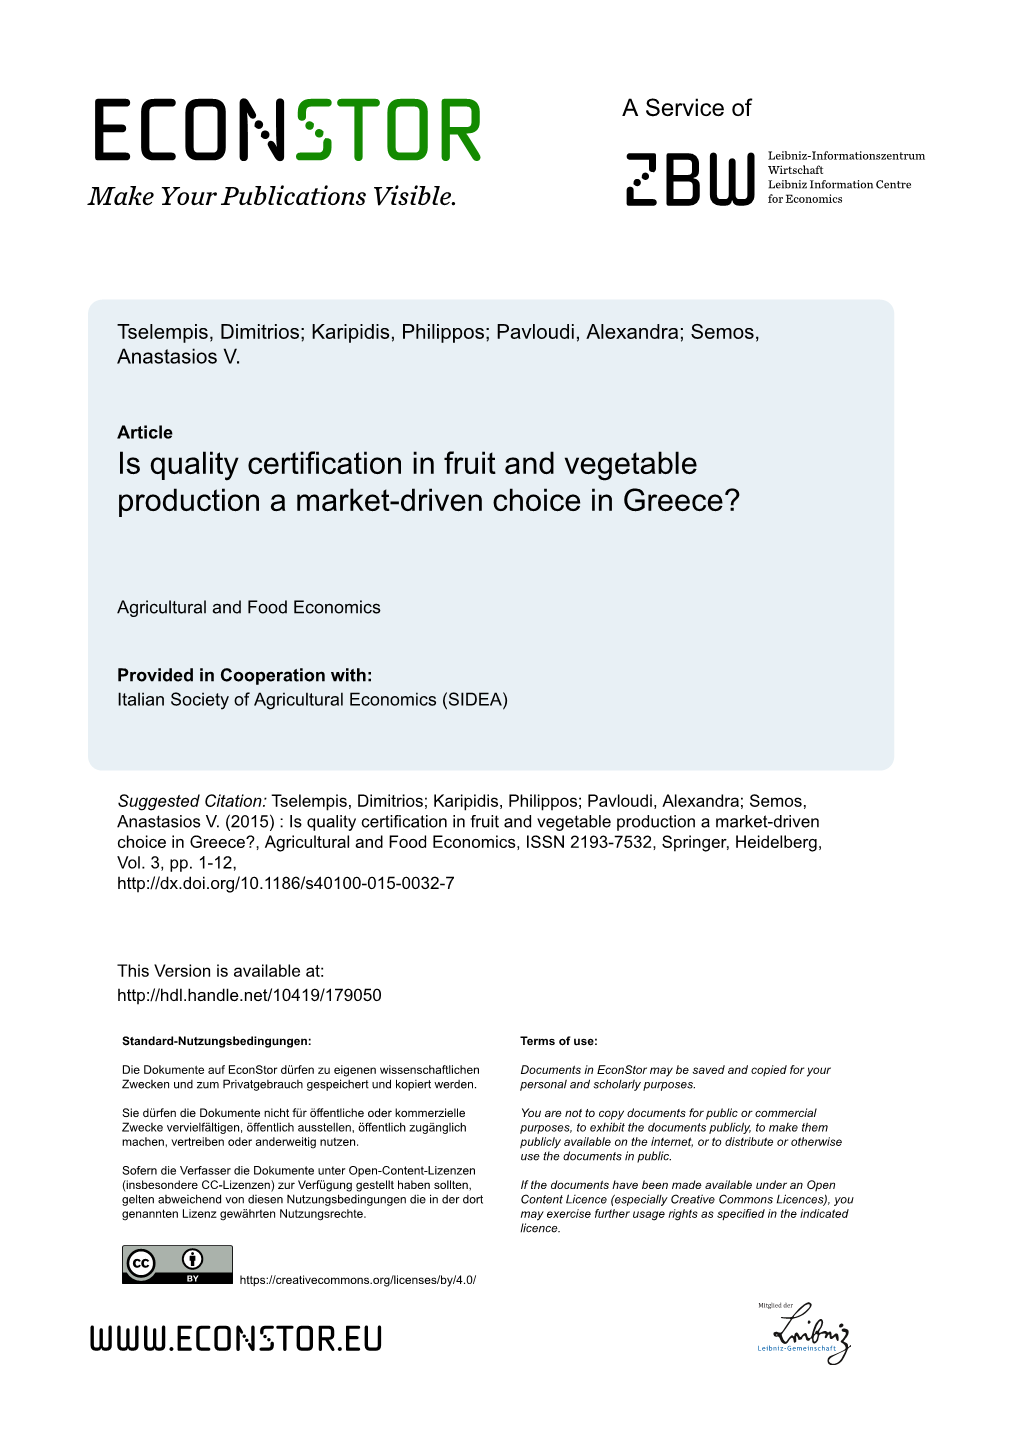 Is Quality Certification in Fruit and Vegetable Production a Market-Driven Choice in Greece?